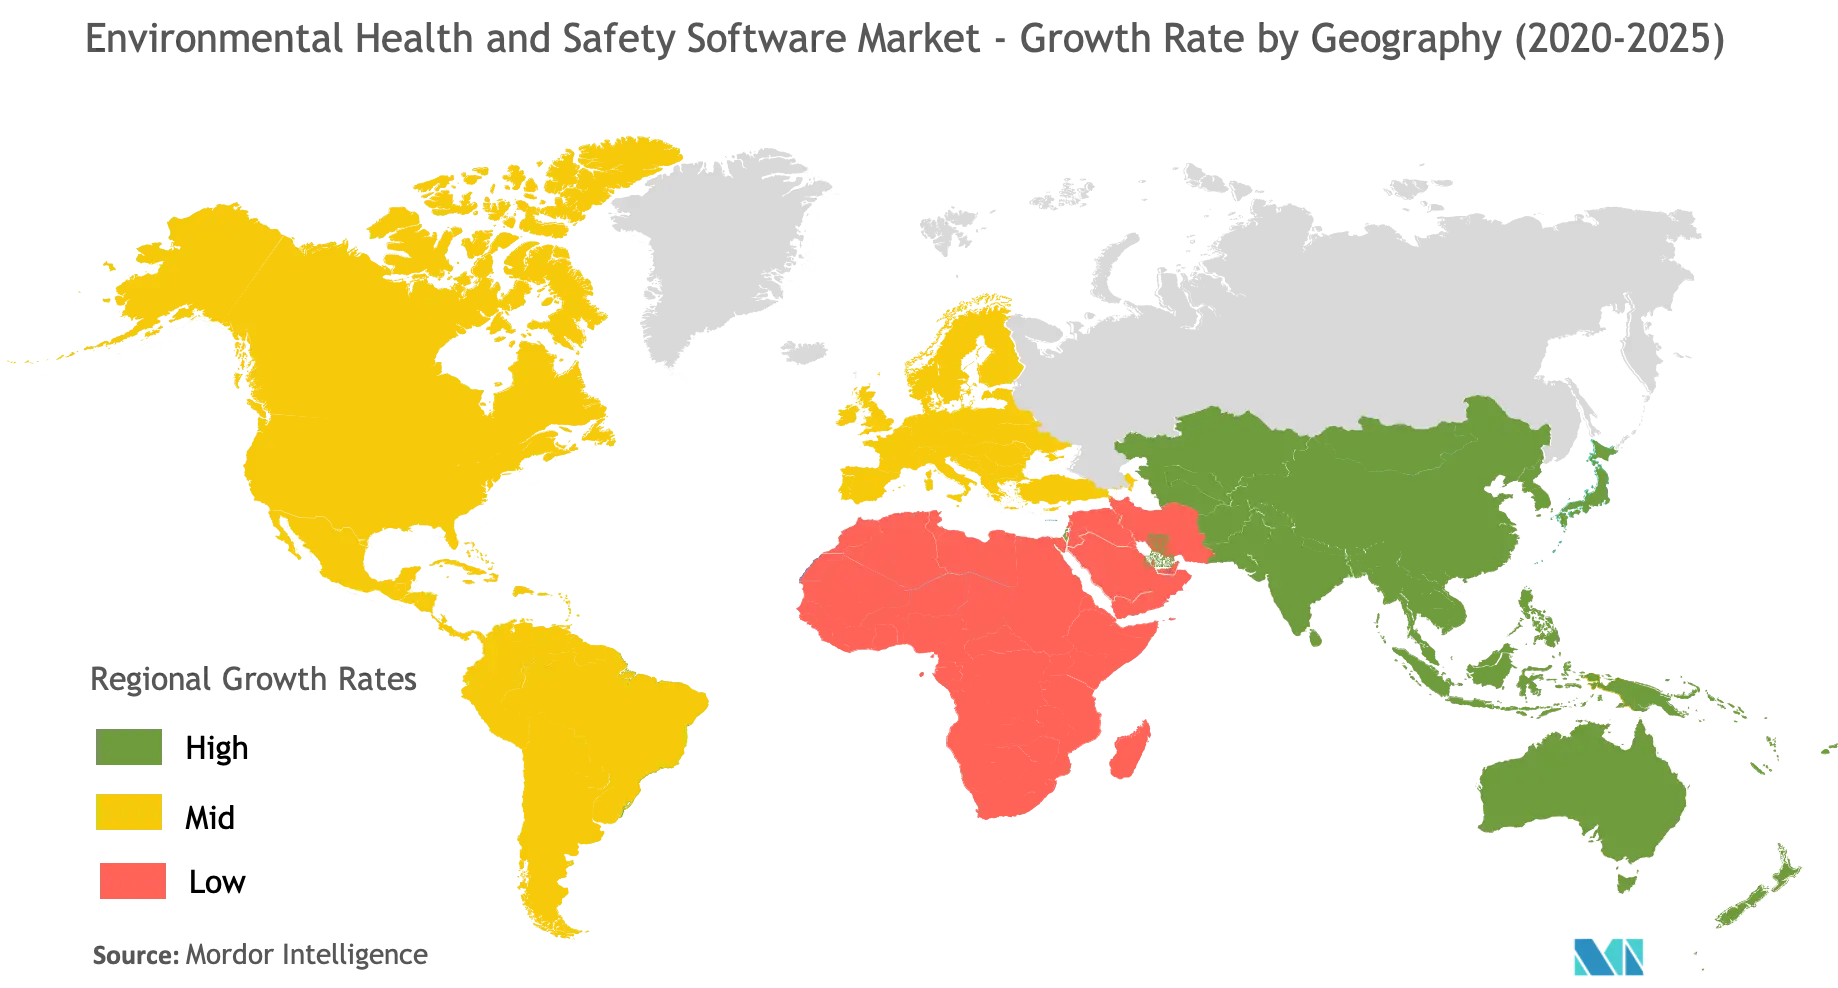 Environmental Health And Safety Software Market Growth Rate